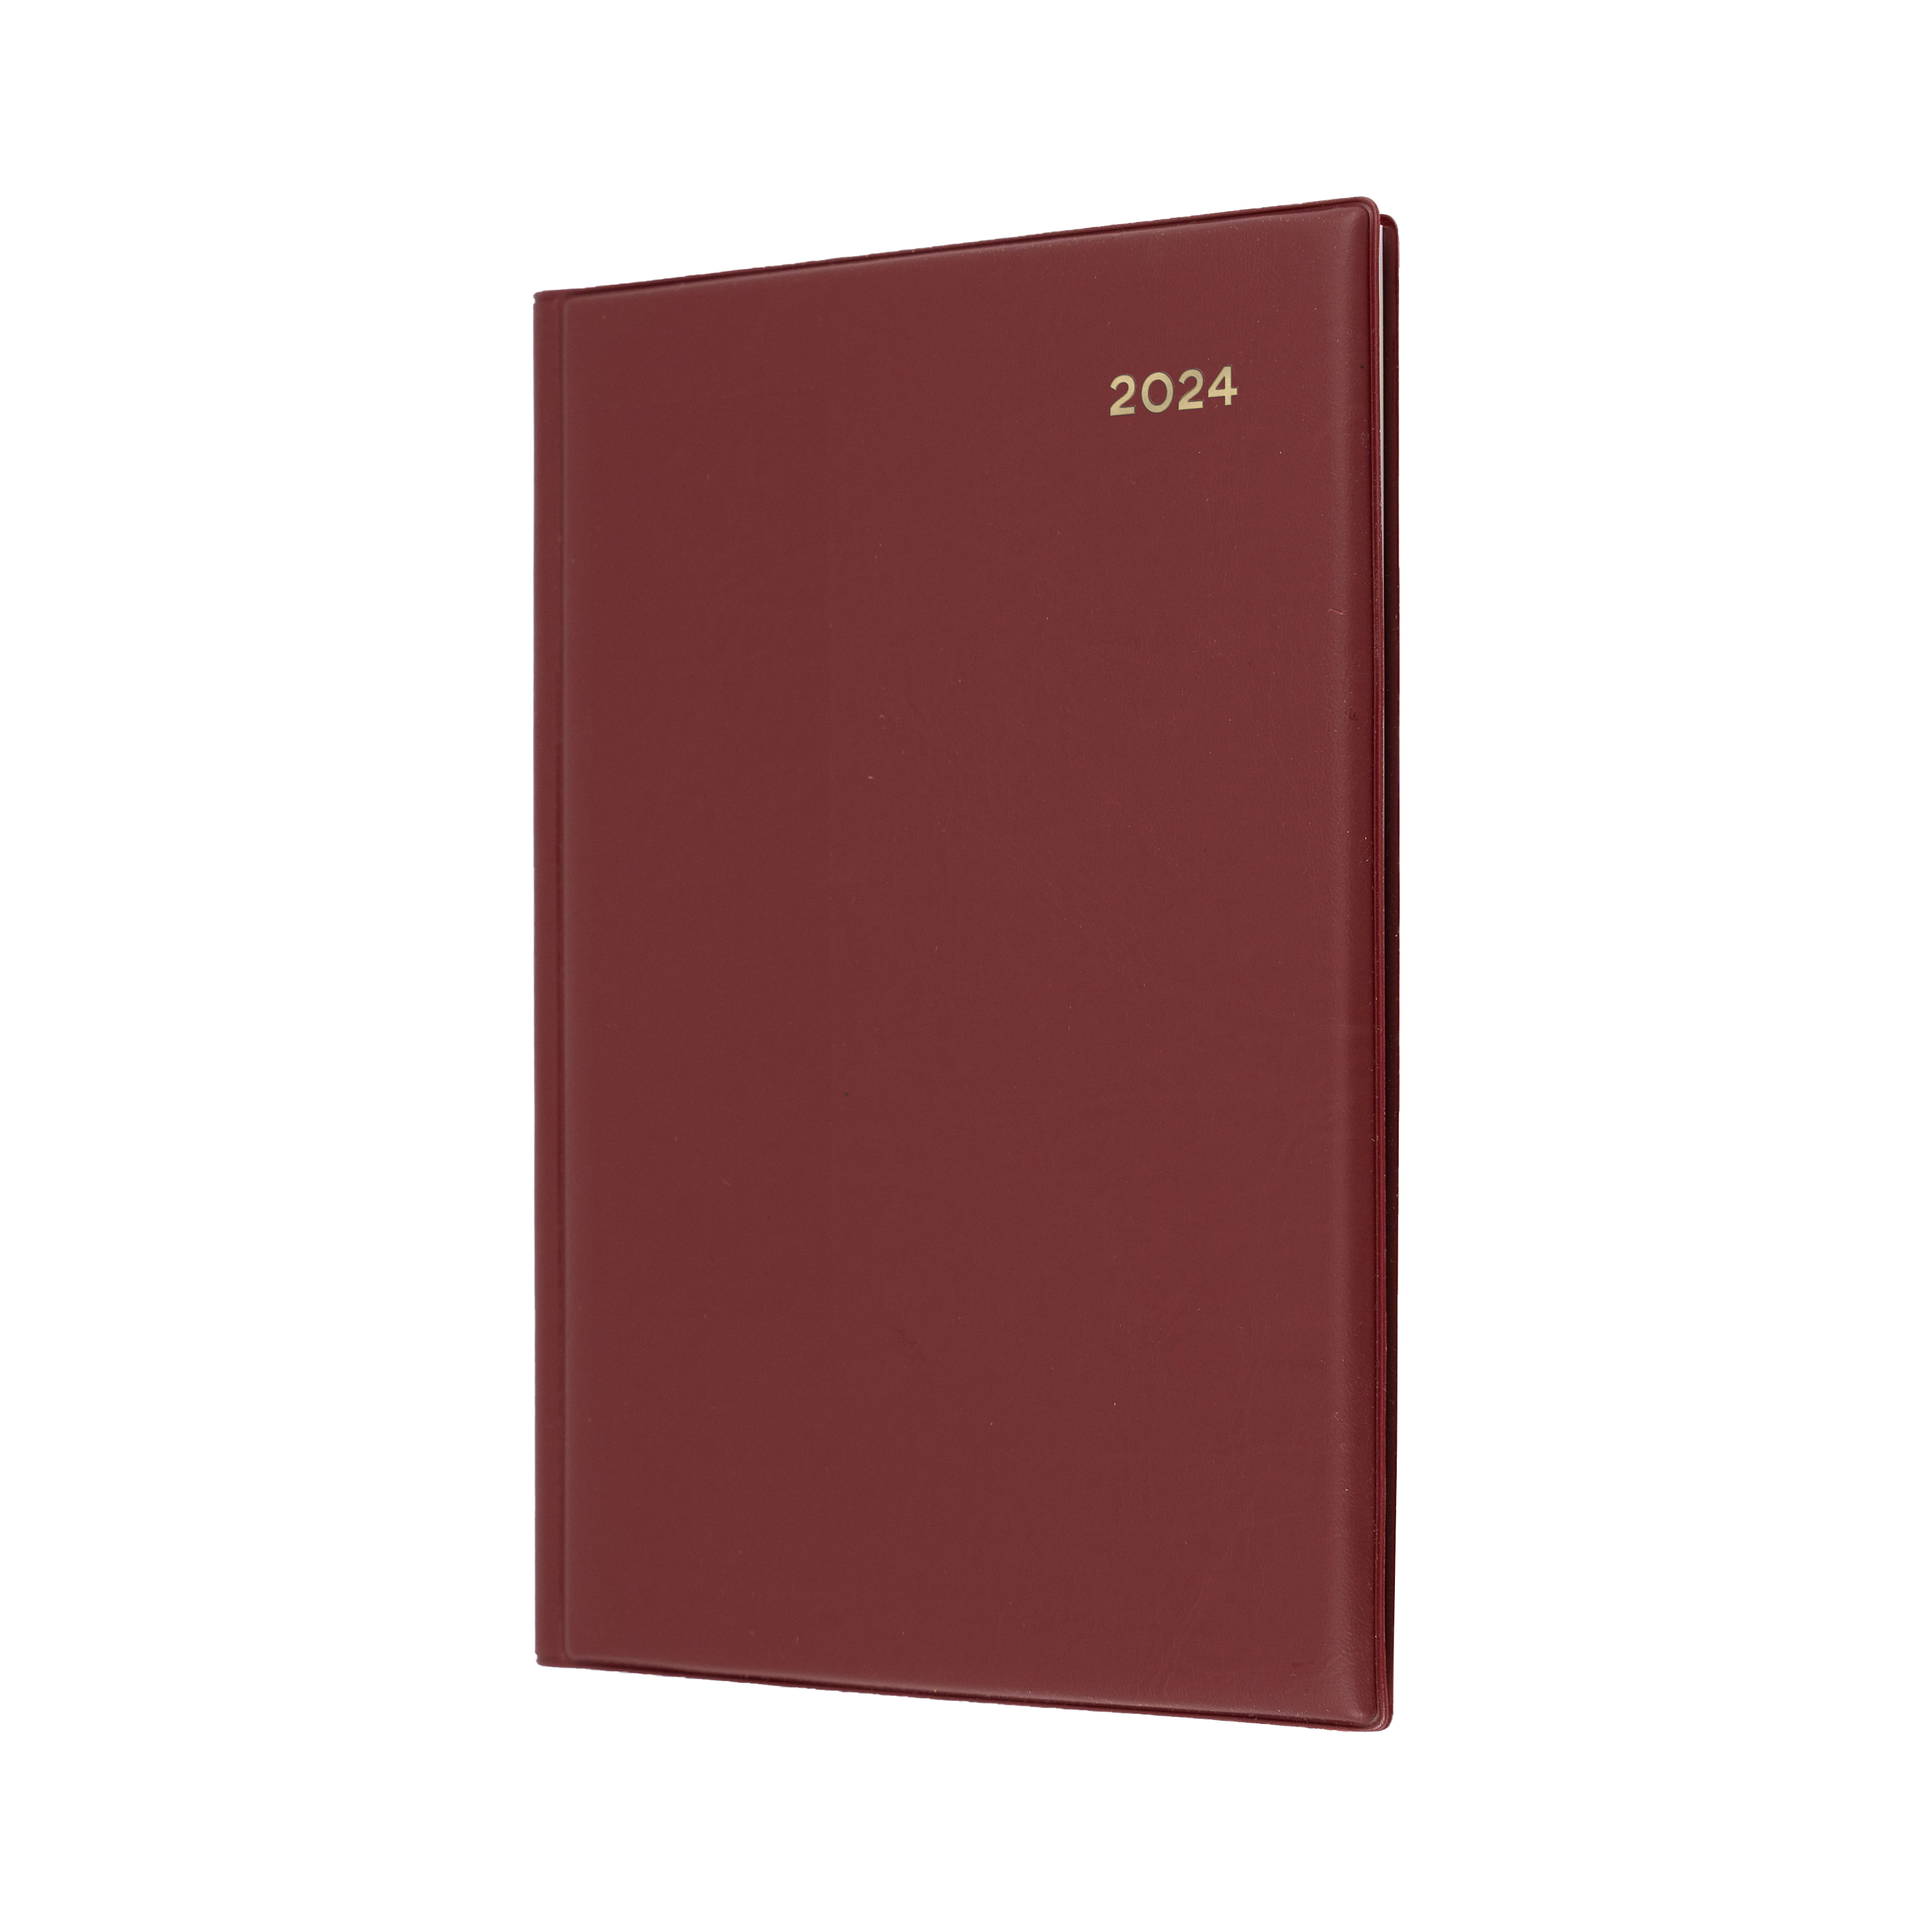 Belmont Desk 2024 Diary - Week to View, Size A5 Burgundy / A5 (210 x 148mm)